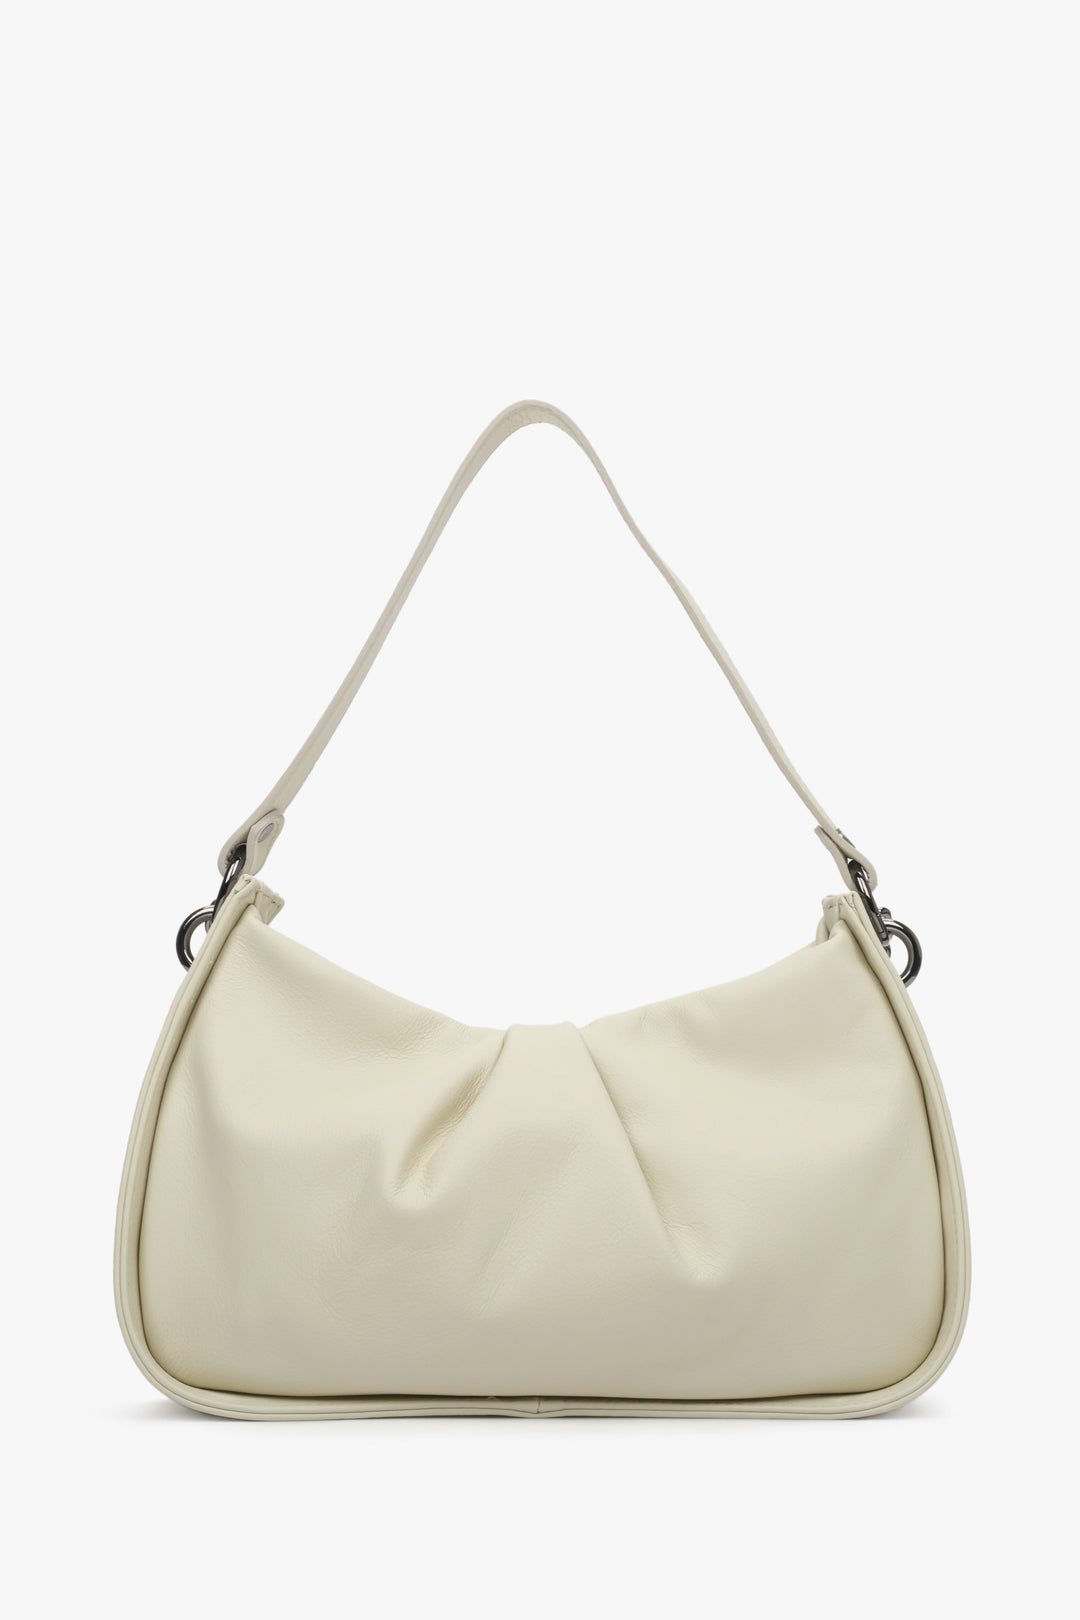 Women's white leather shoulder bag by Estro - back view of the model.